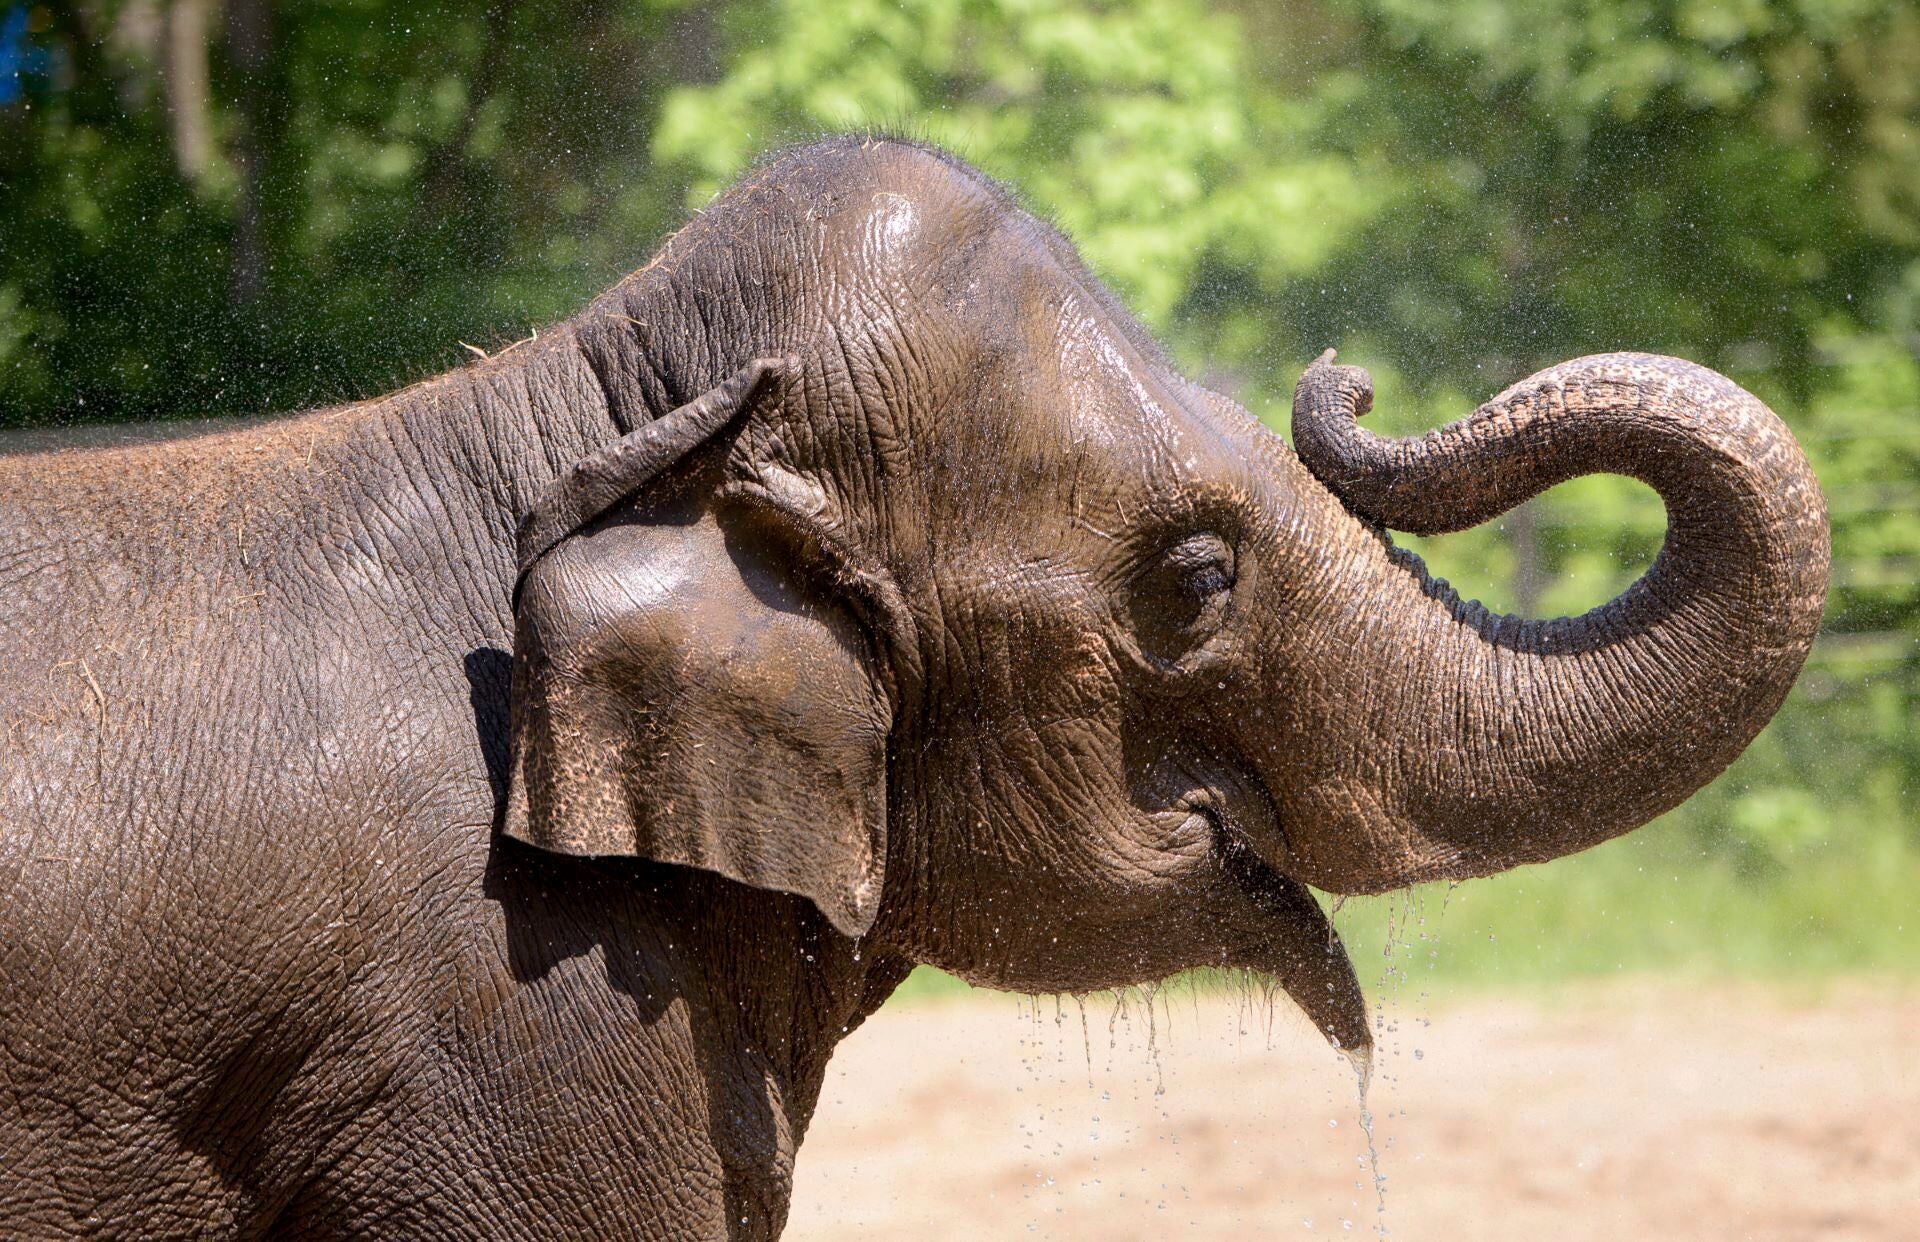 This is an image of Rani, an Asian elephant who died after getting spooked by a small lost dog